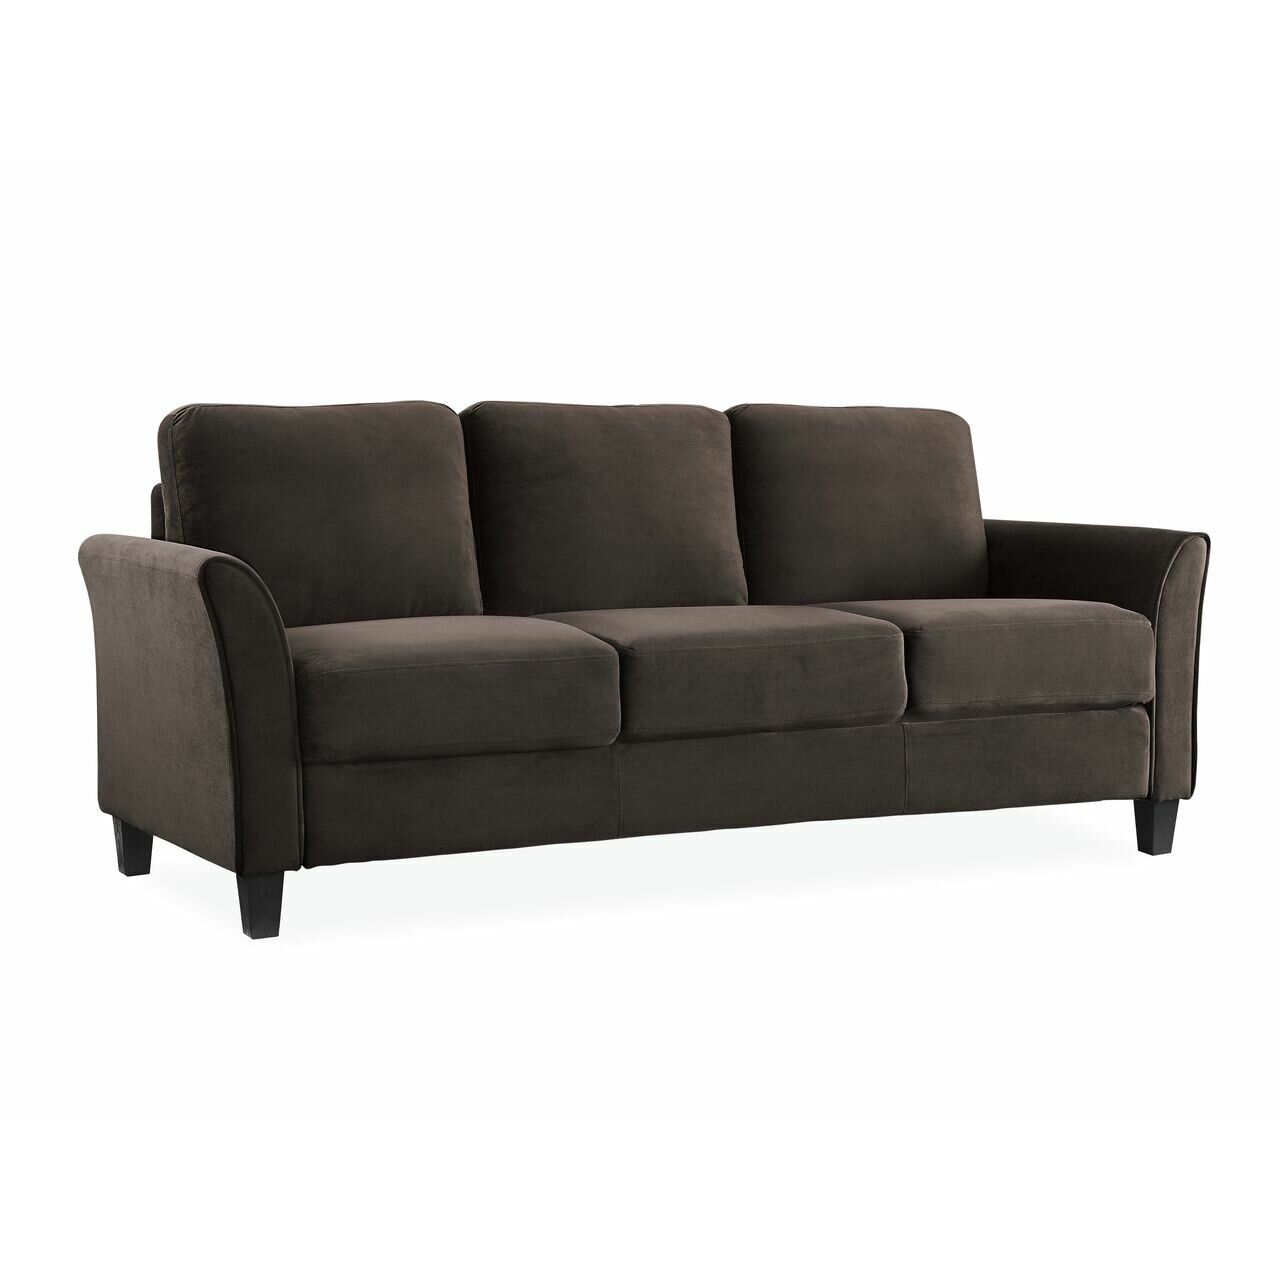 Charlton Home Patricia Curved Arm Sofa & Reviews | Wayfair Regarding Sofas With Curved Arms (View 9 of 20)